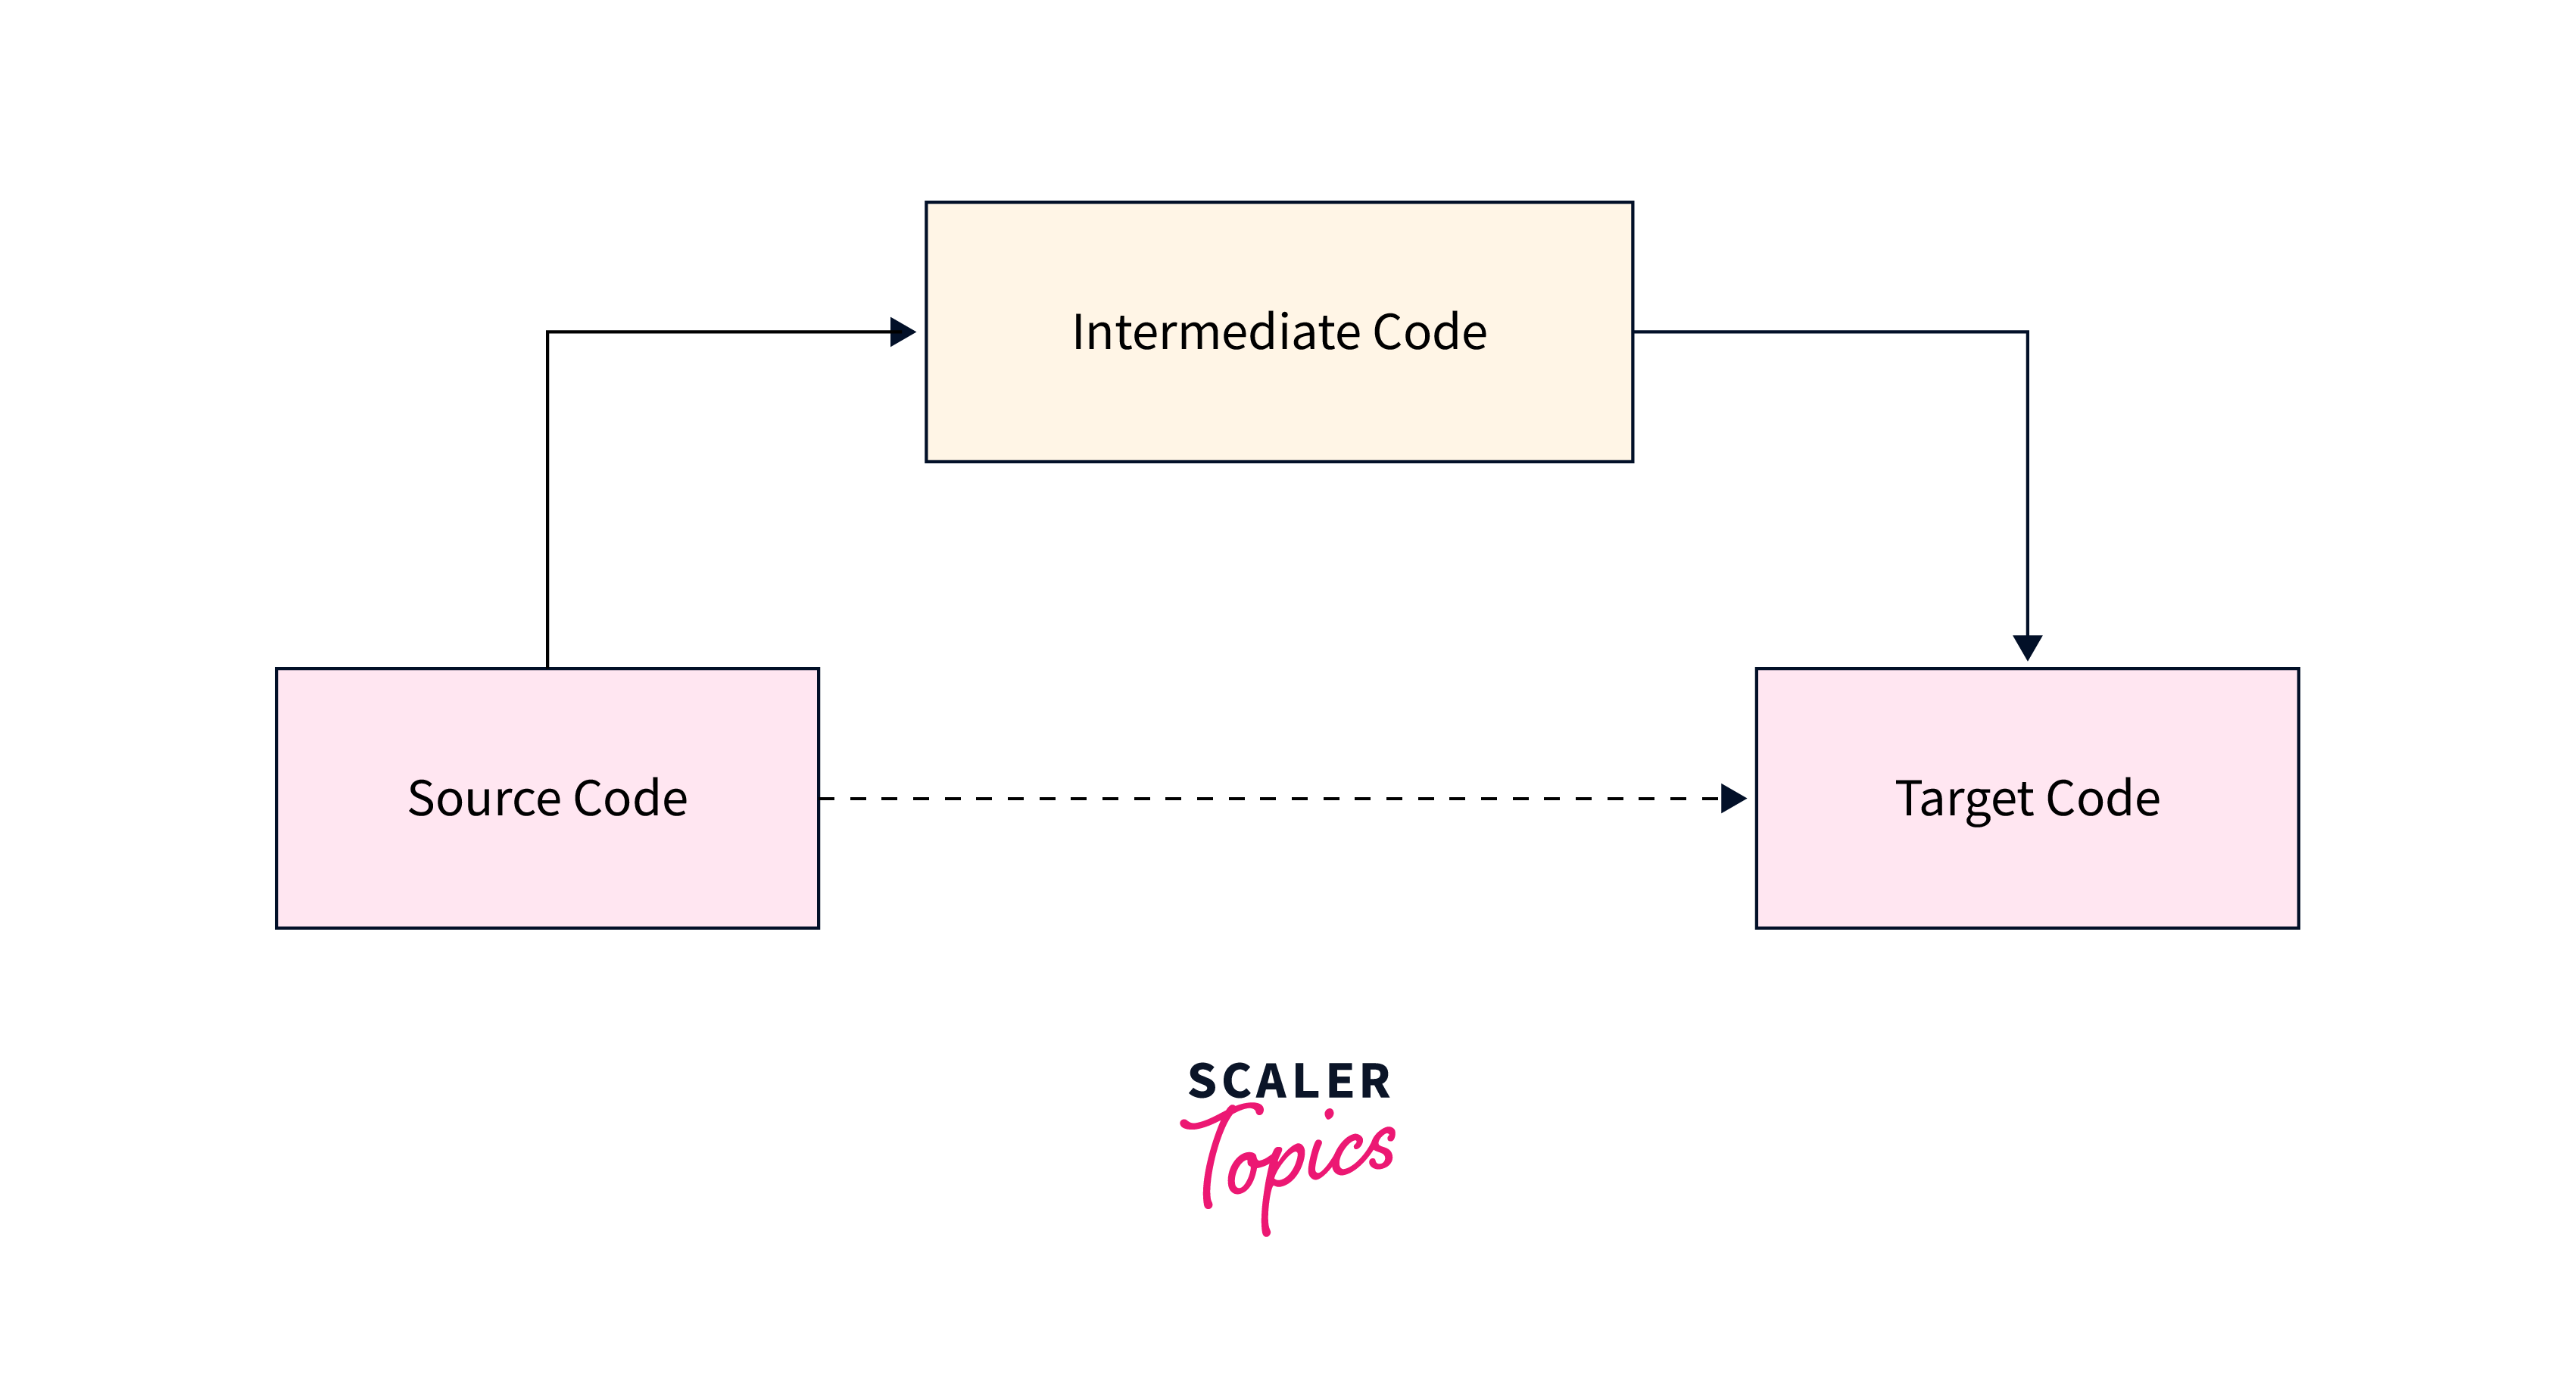 conversion of source code to target code